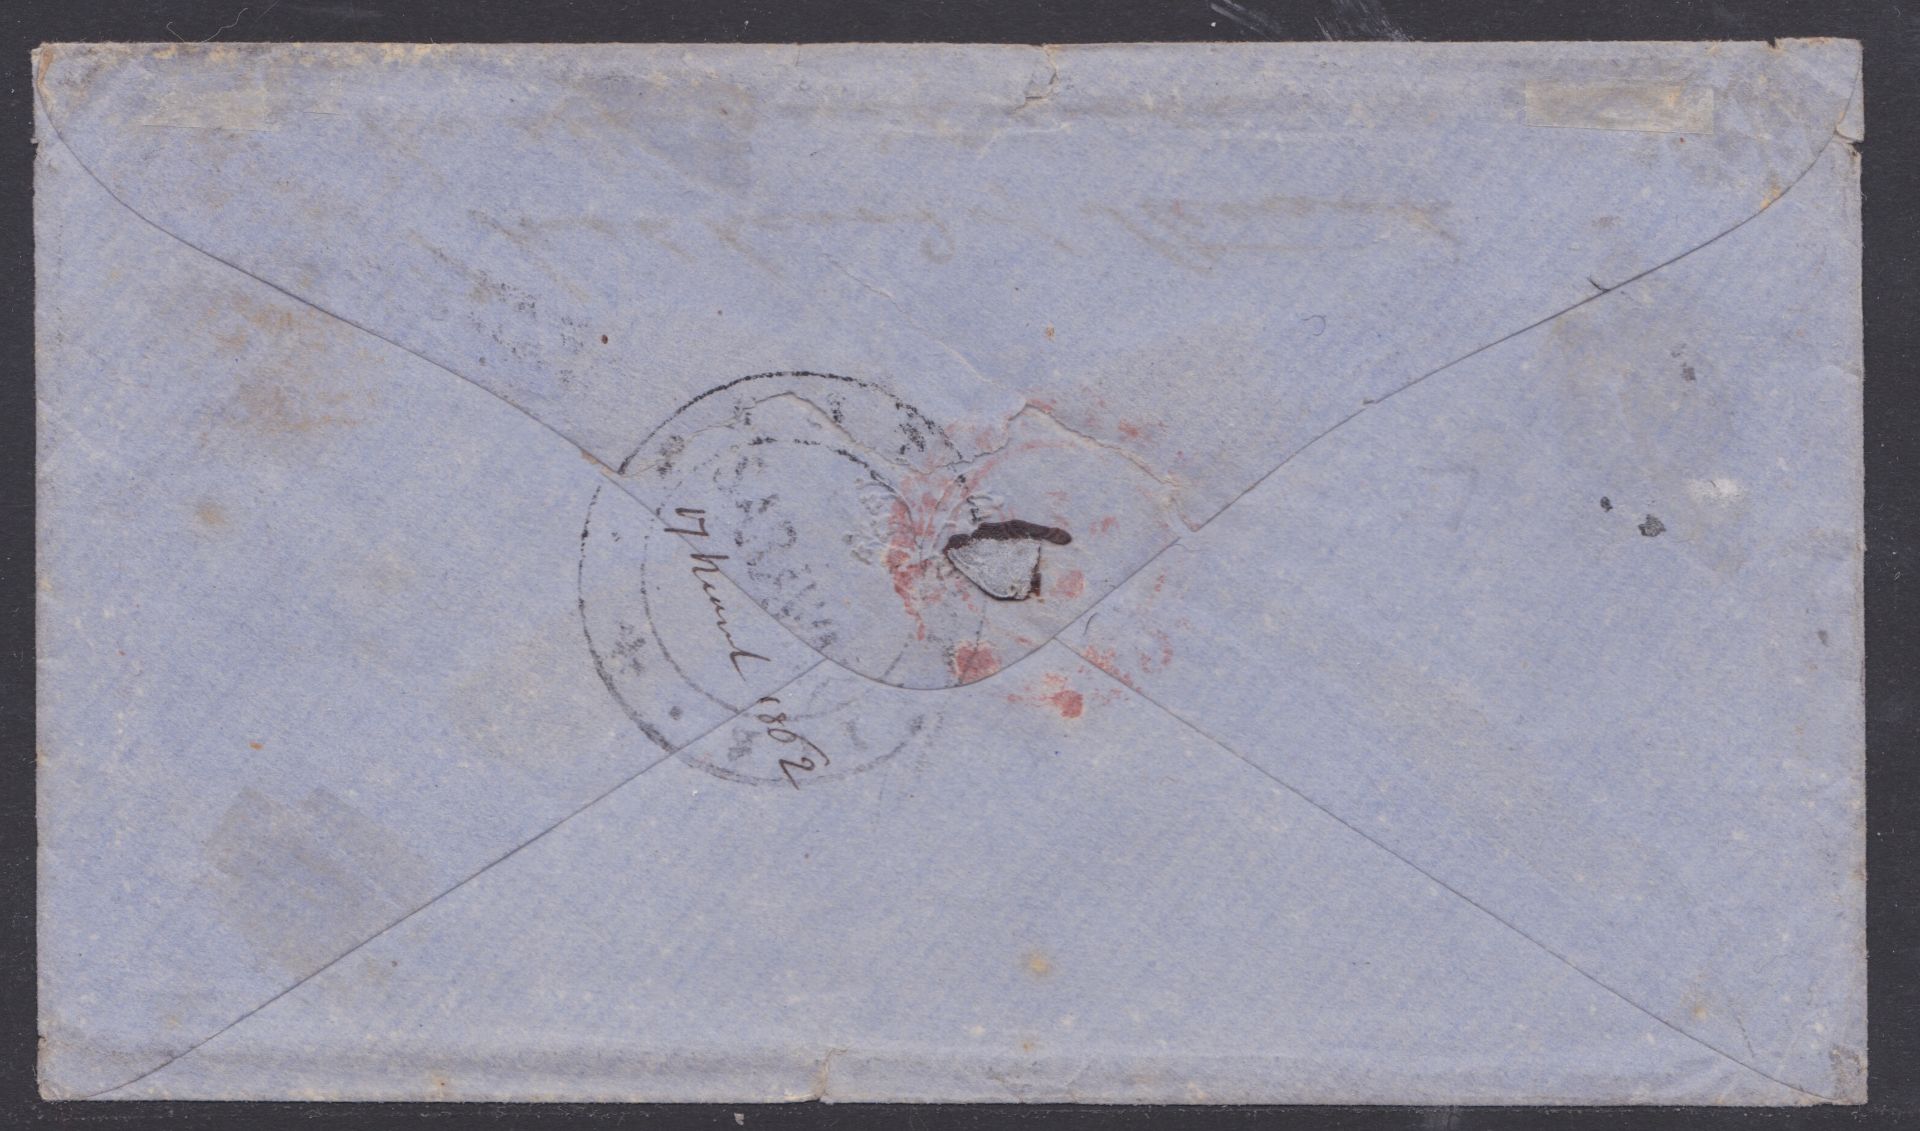 SARAWAK 1862 - Neat Blue Envelope to the Revd. F.C. Johnson in Somerset, franked by 1856-64 2a - Image 2 of 2